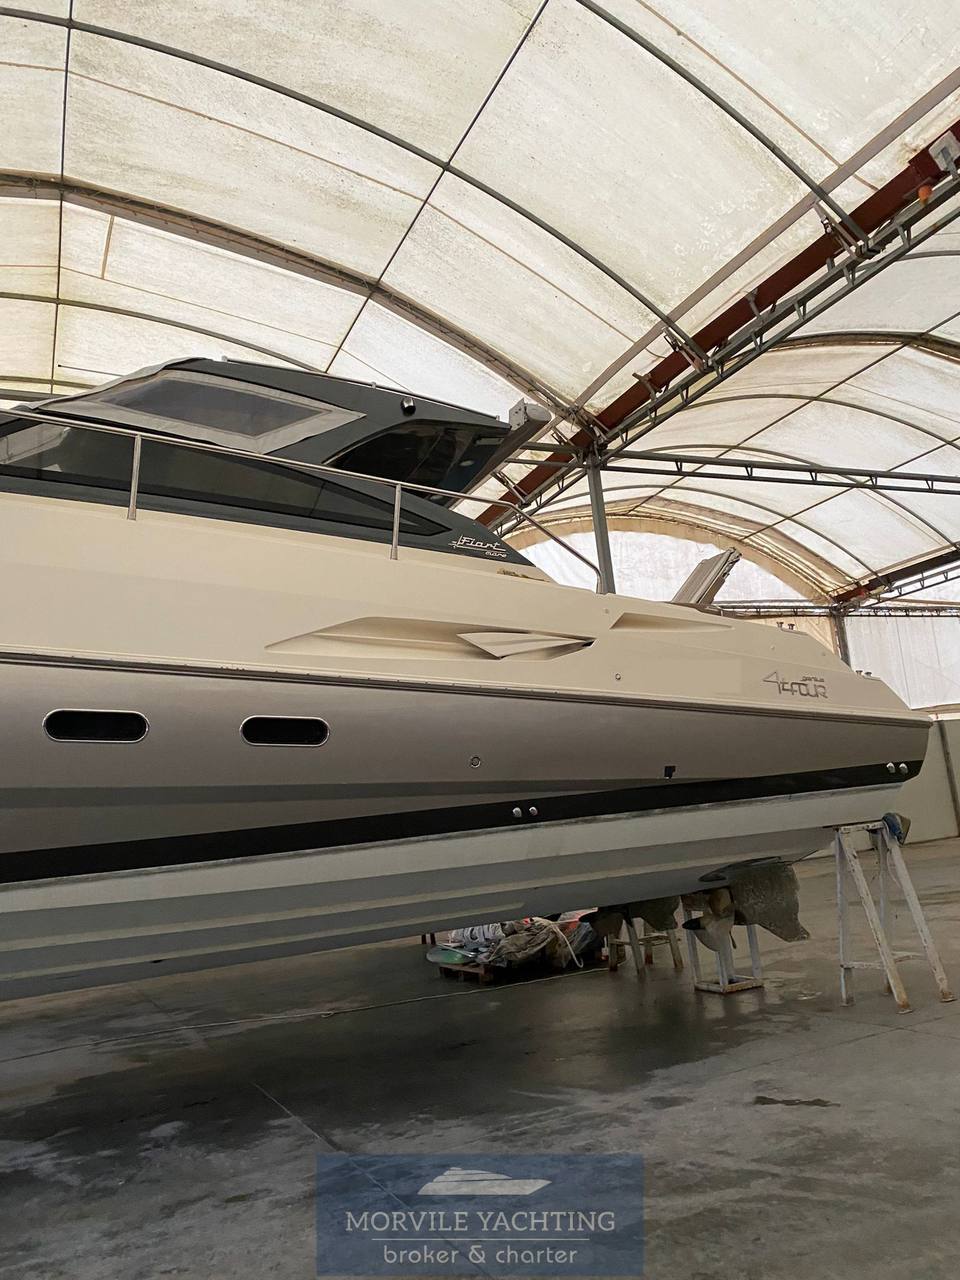 Fiart 44 ht Motor boat used for sale